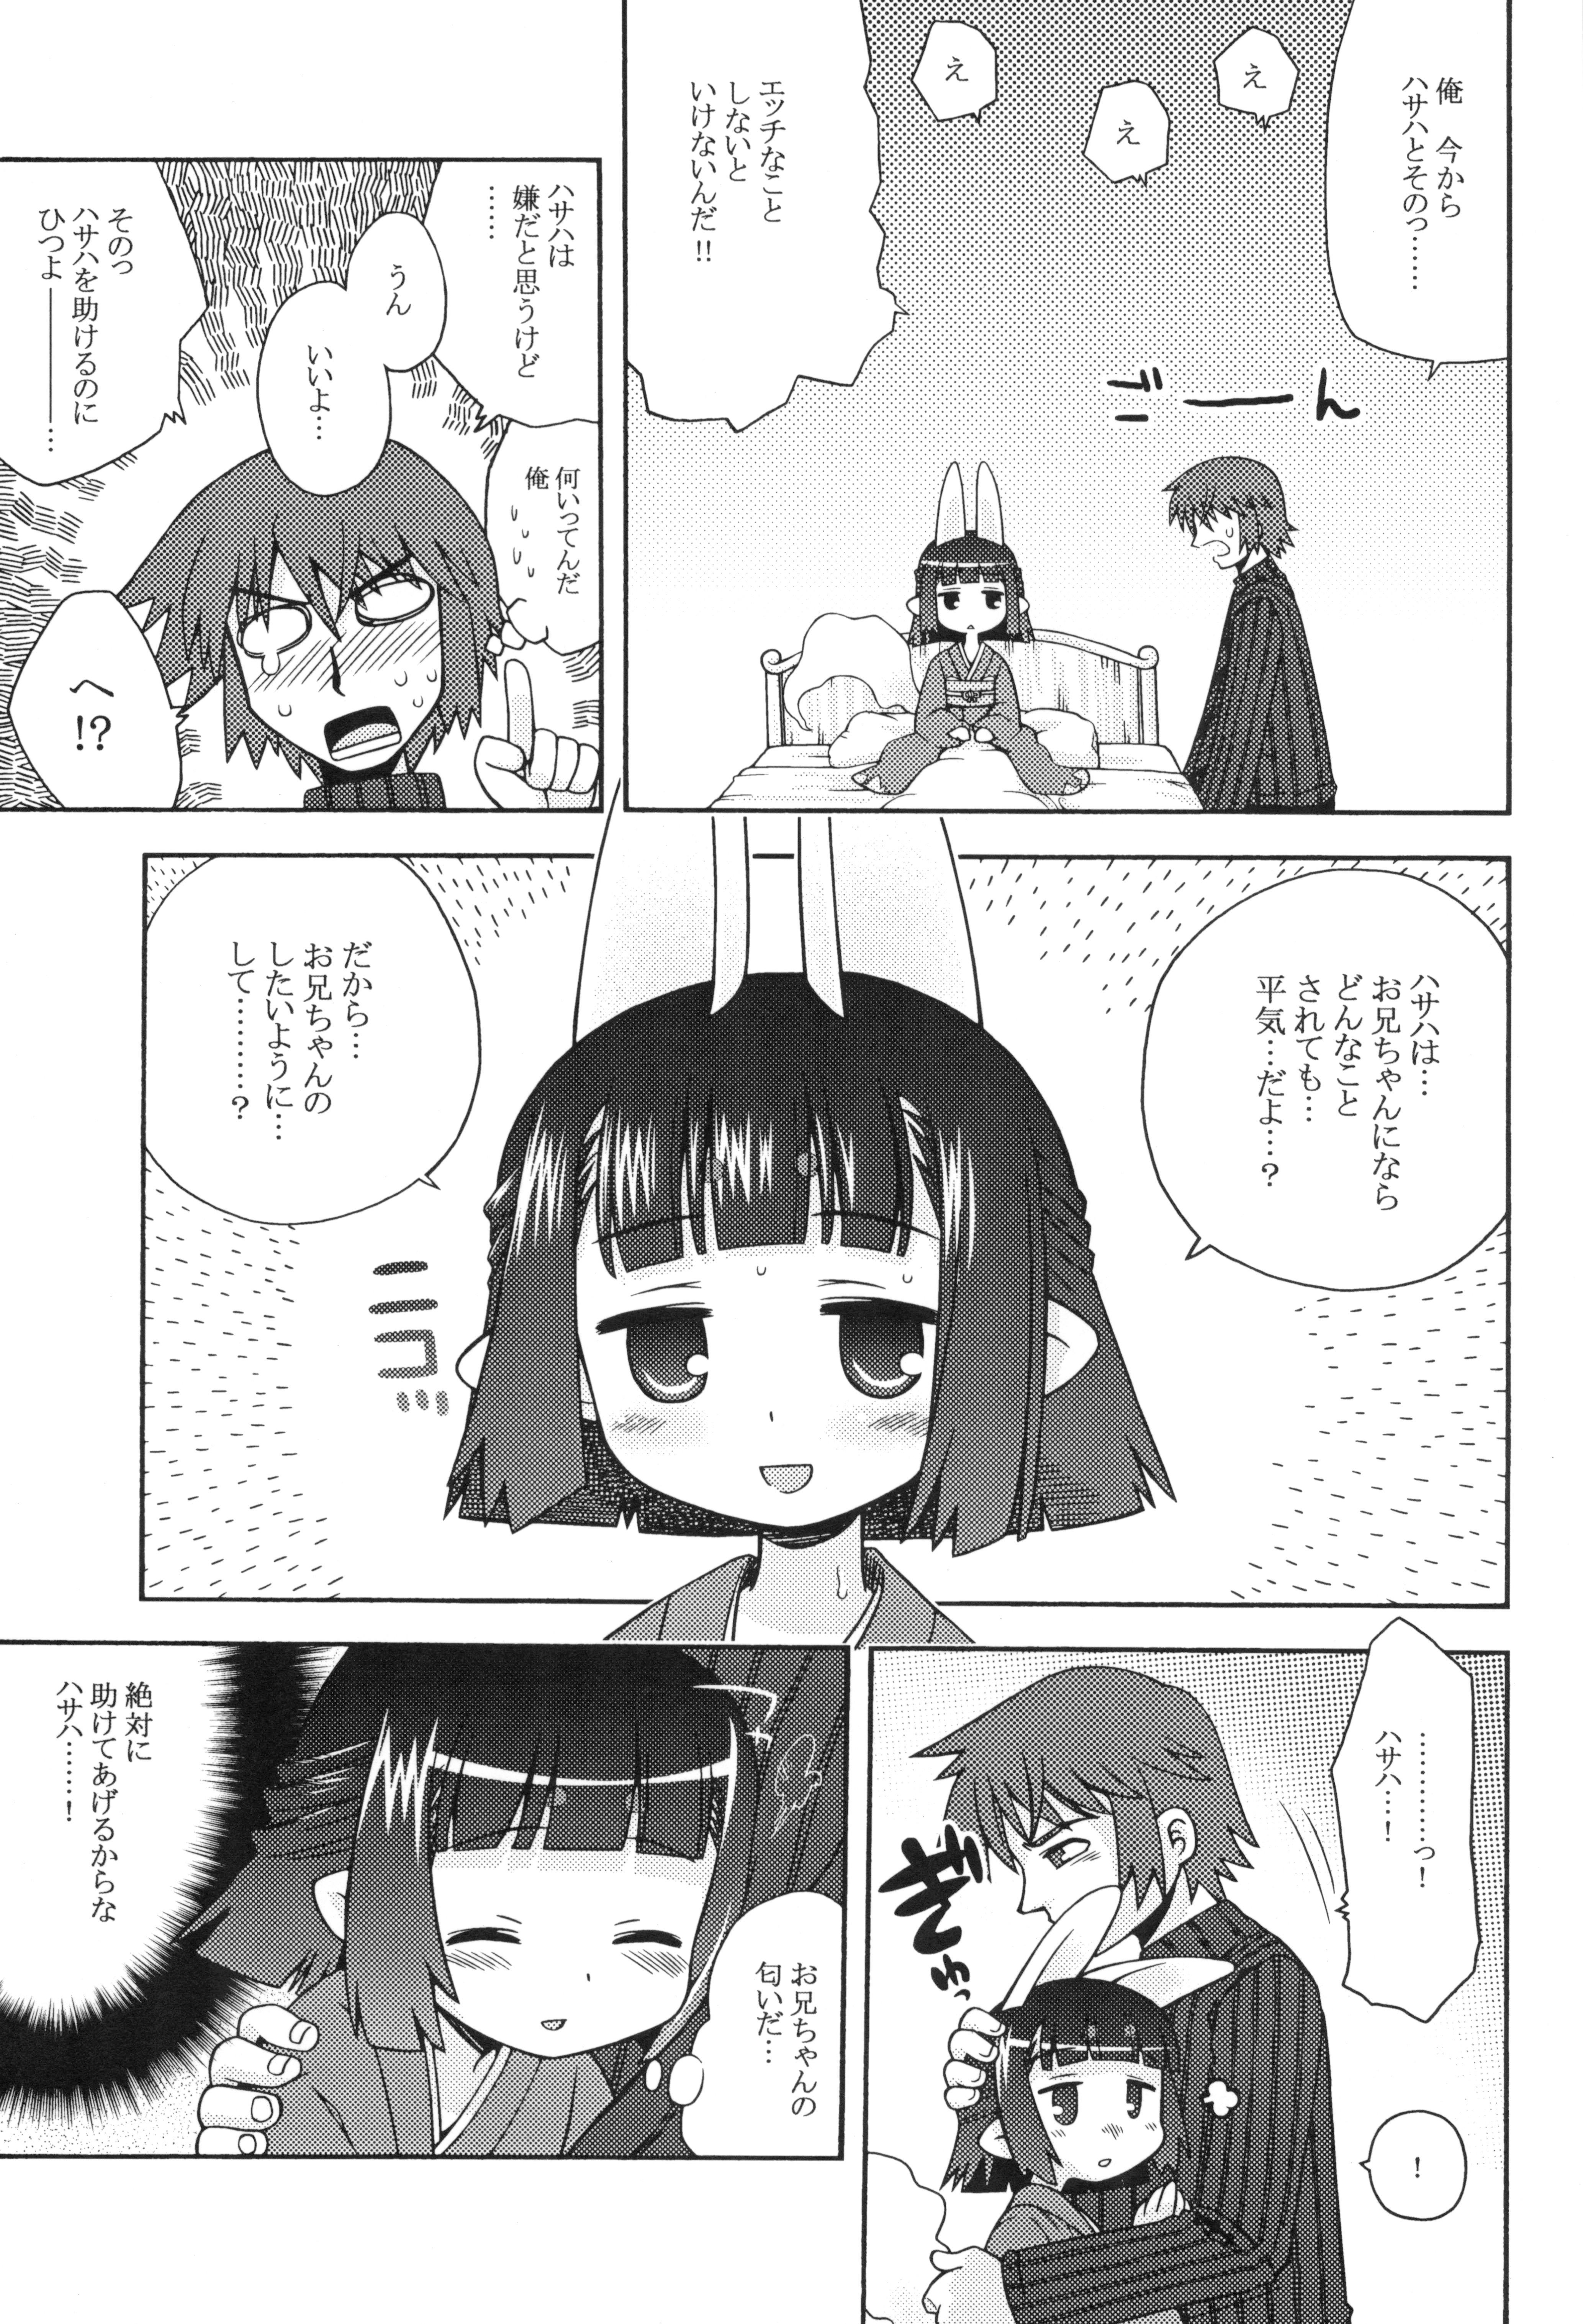 Fucking Pussy Hasaha no Anone 2 - Summon night Sixtynine - Page 7